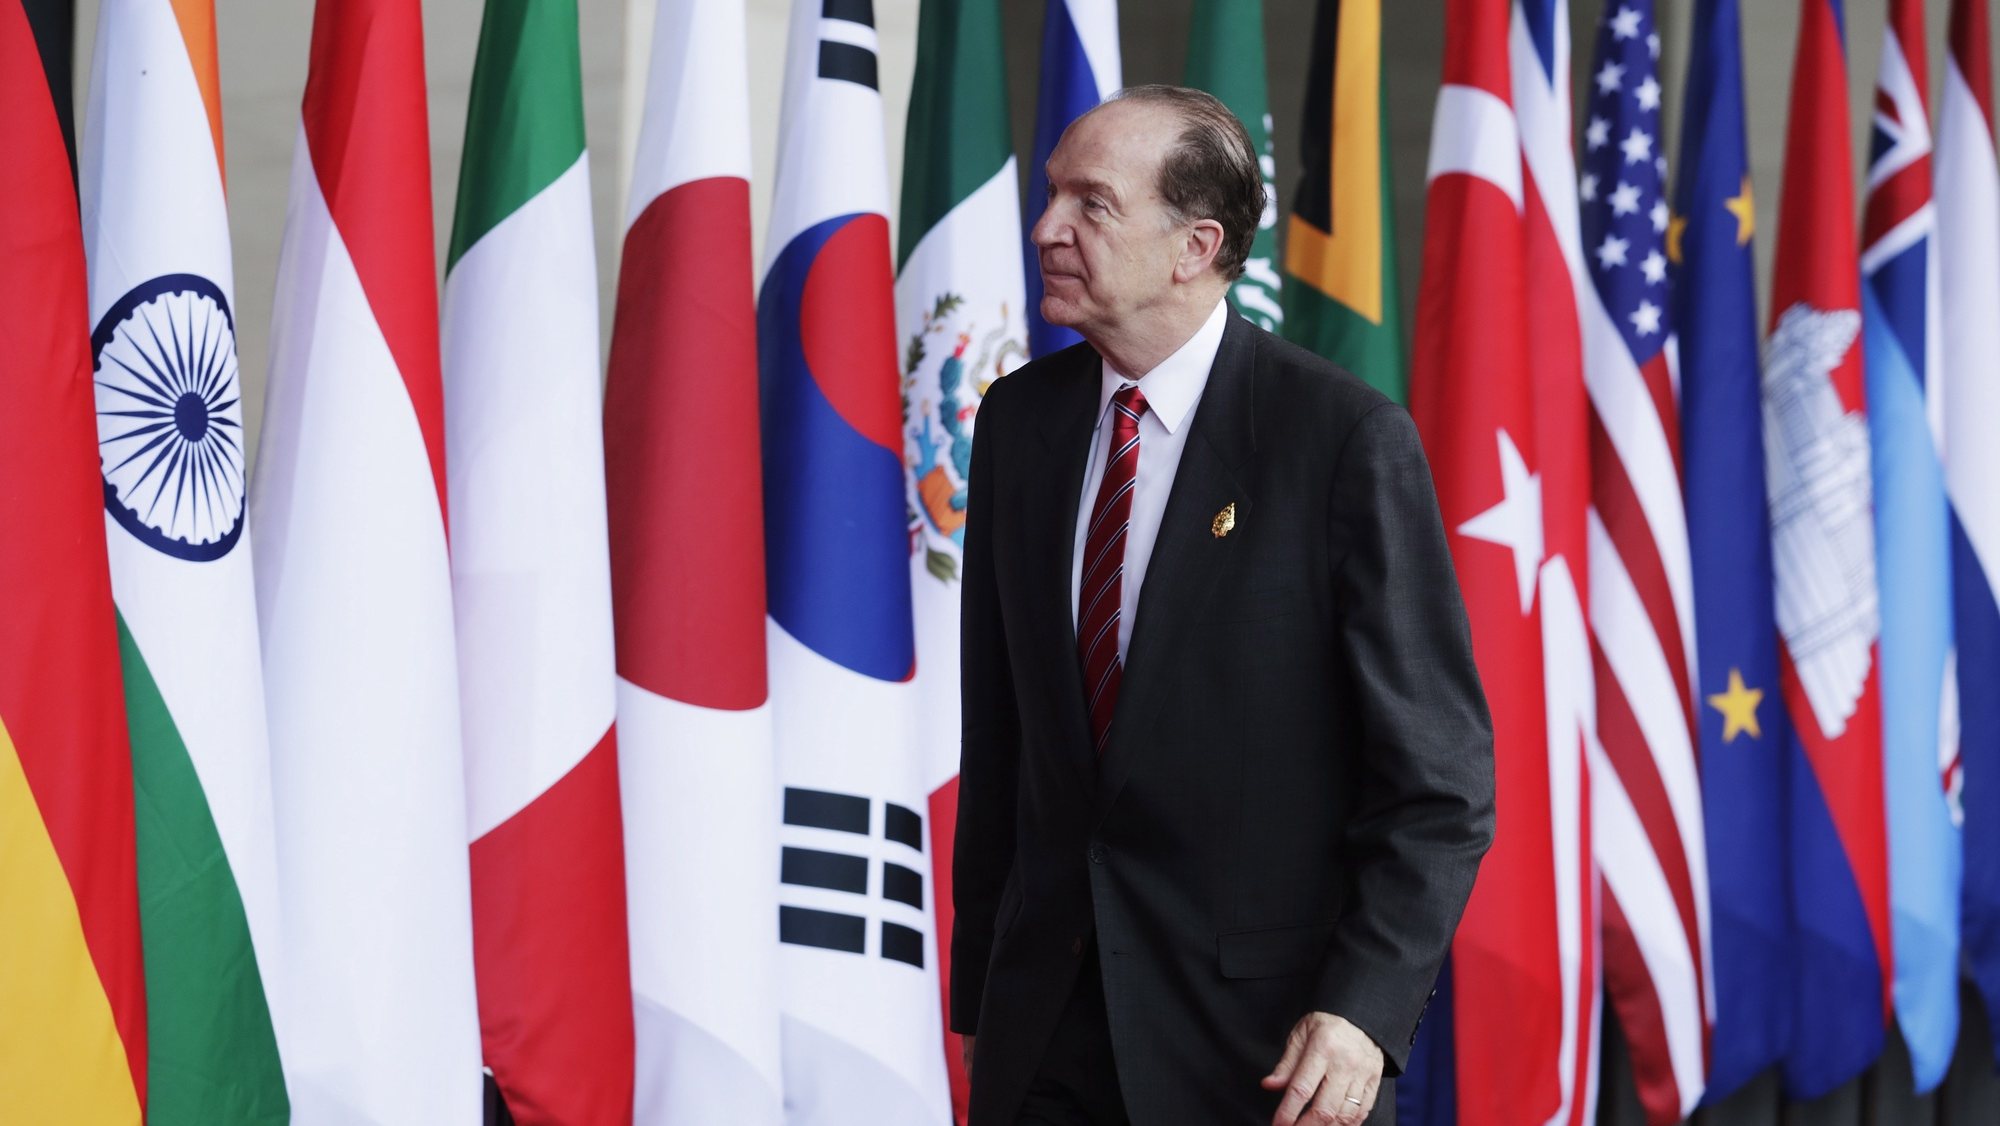 epa10306307 World Bank Group (WBG) President David Malpass arrives for the G20 Leaders Summit in Bali, Indonesia, 15 November 2022. The 17th Group of Twenty (G20) Heads of State and Government Summit runs from 15 to 16 November 2022.  EPA/MAST IRHAM / POOL